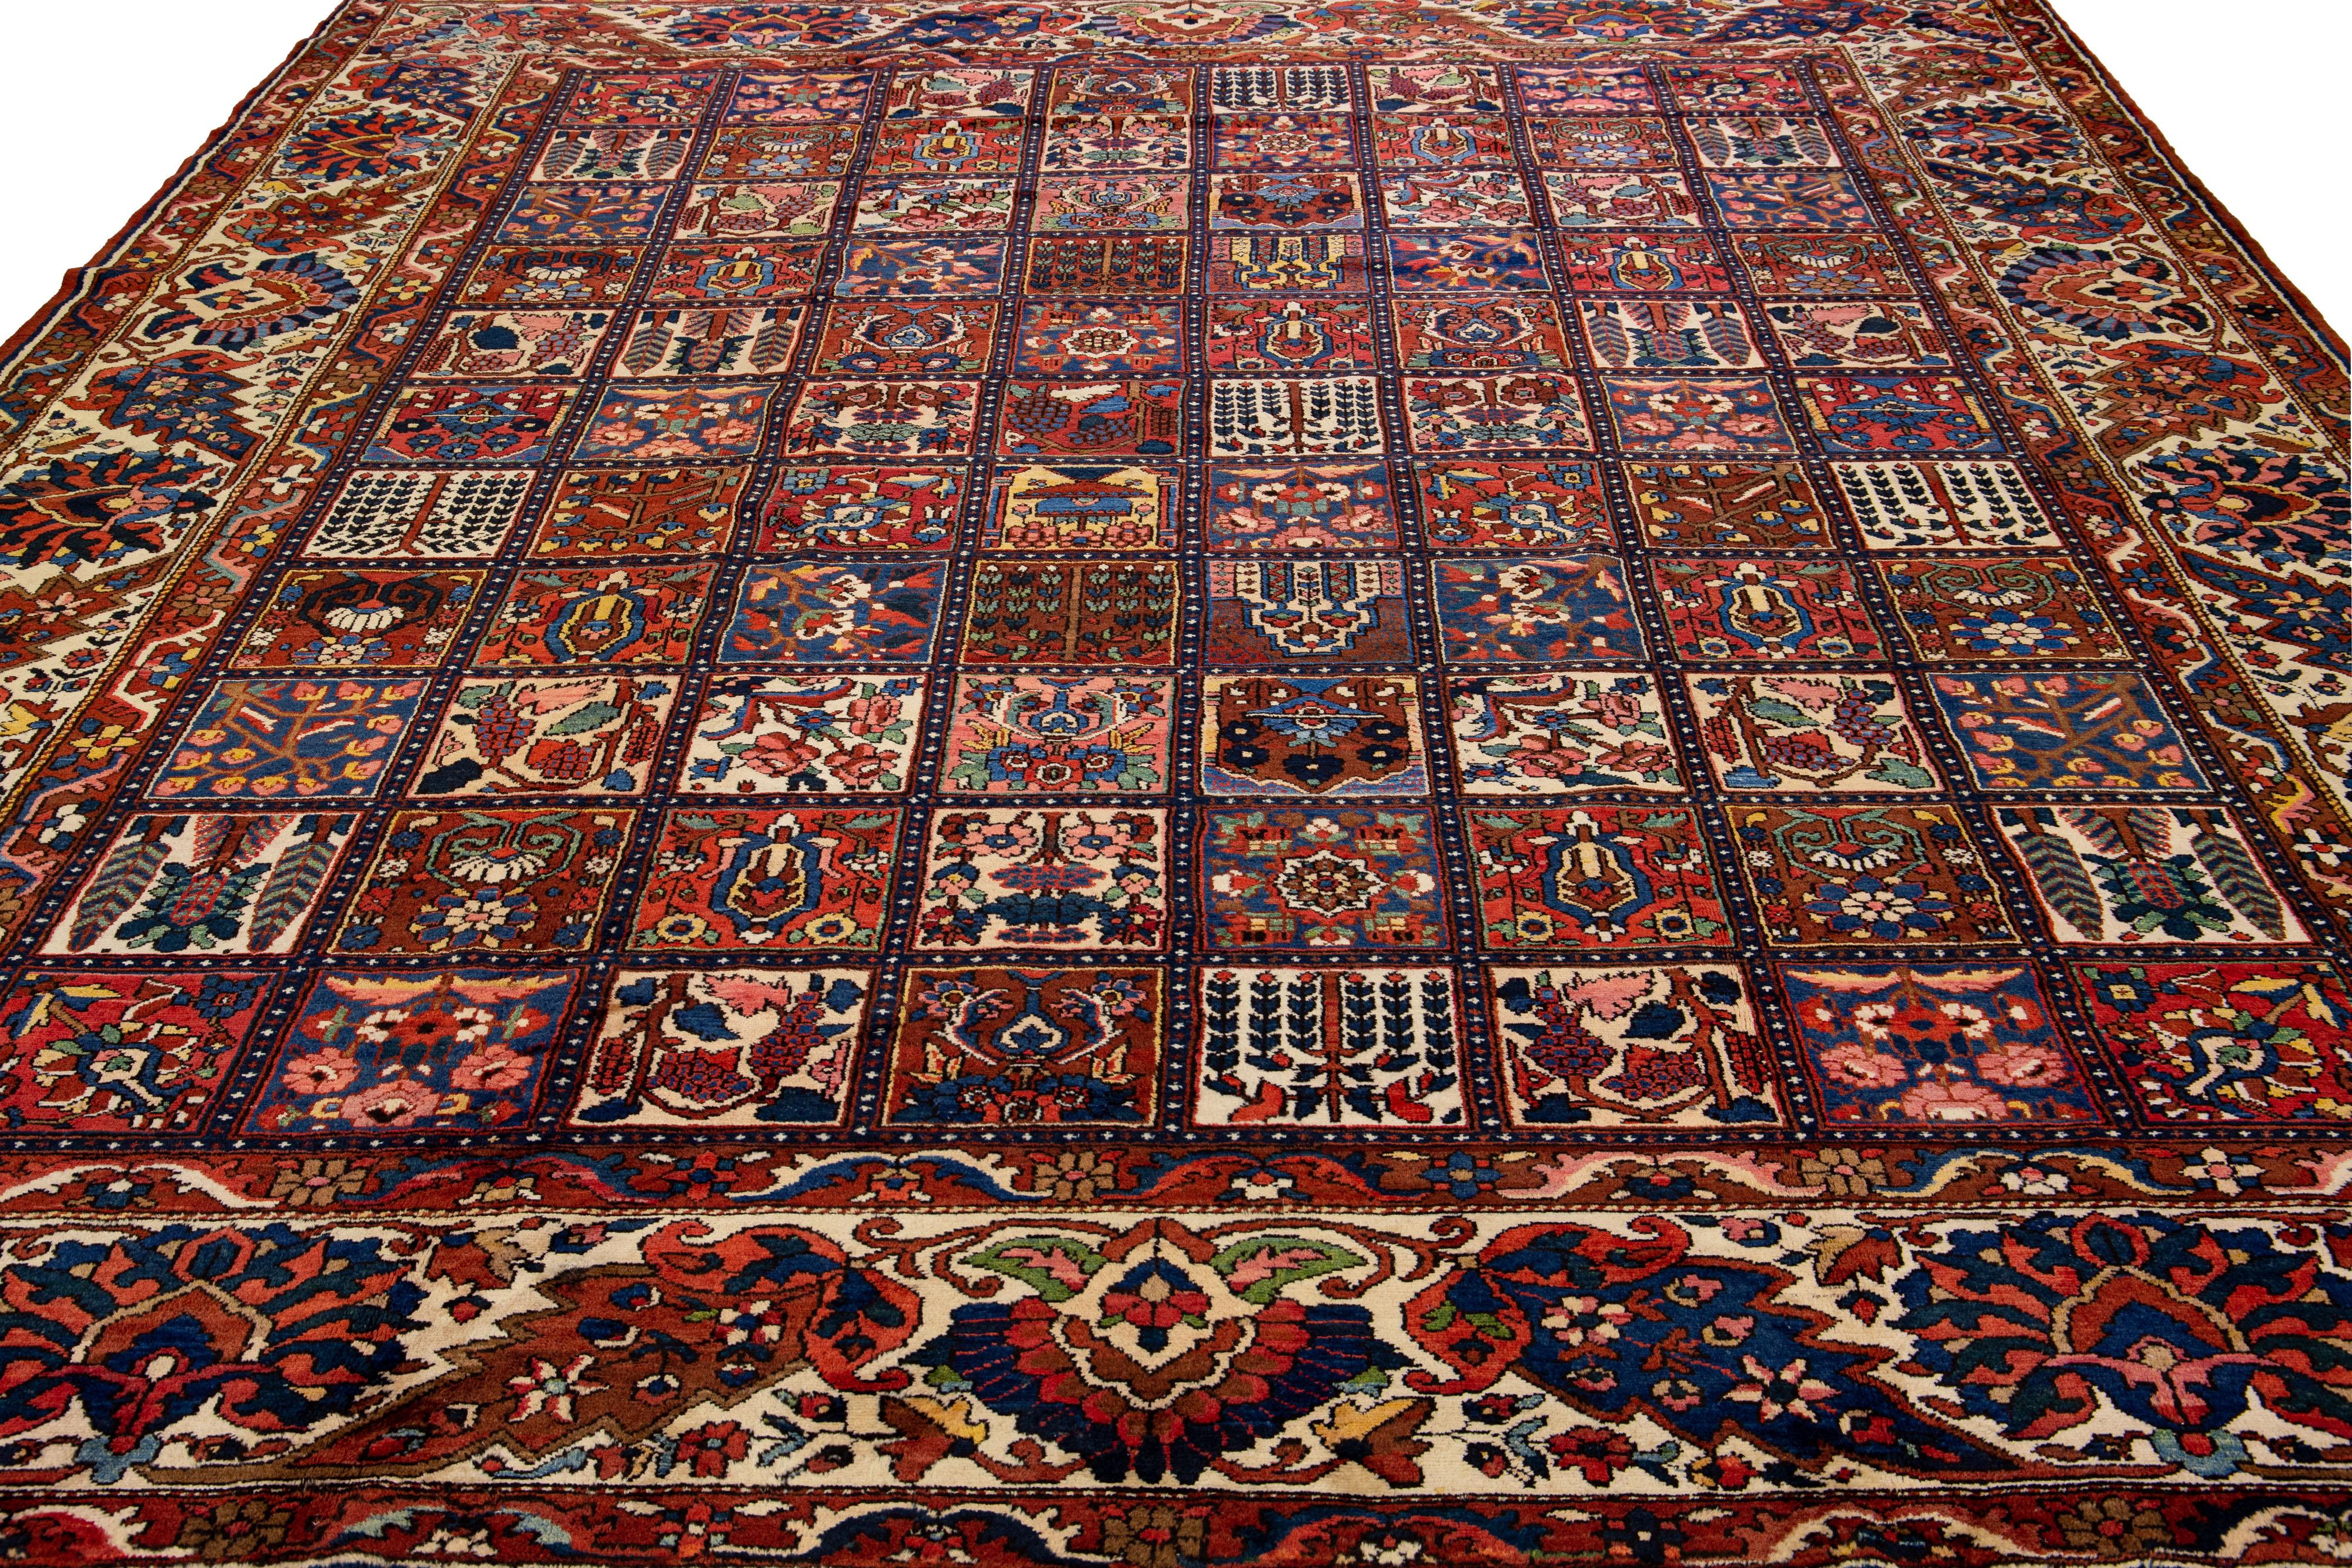 Beautiful Antique Bakhtiari hand-knotted wool rug with a multicolor field. This Persian piece has an all-over classic pattern design.

This rug measures 13'5